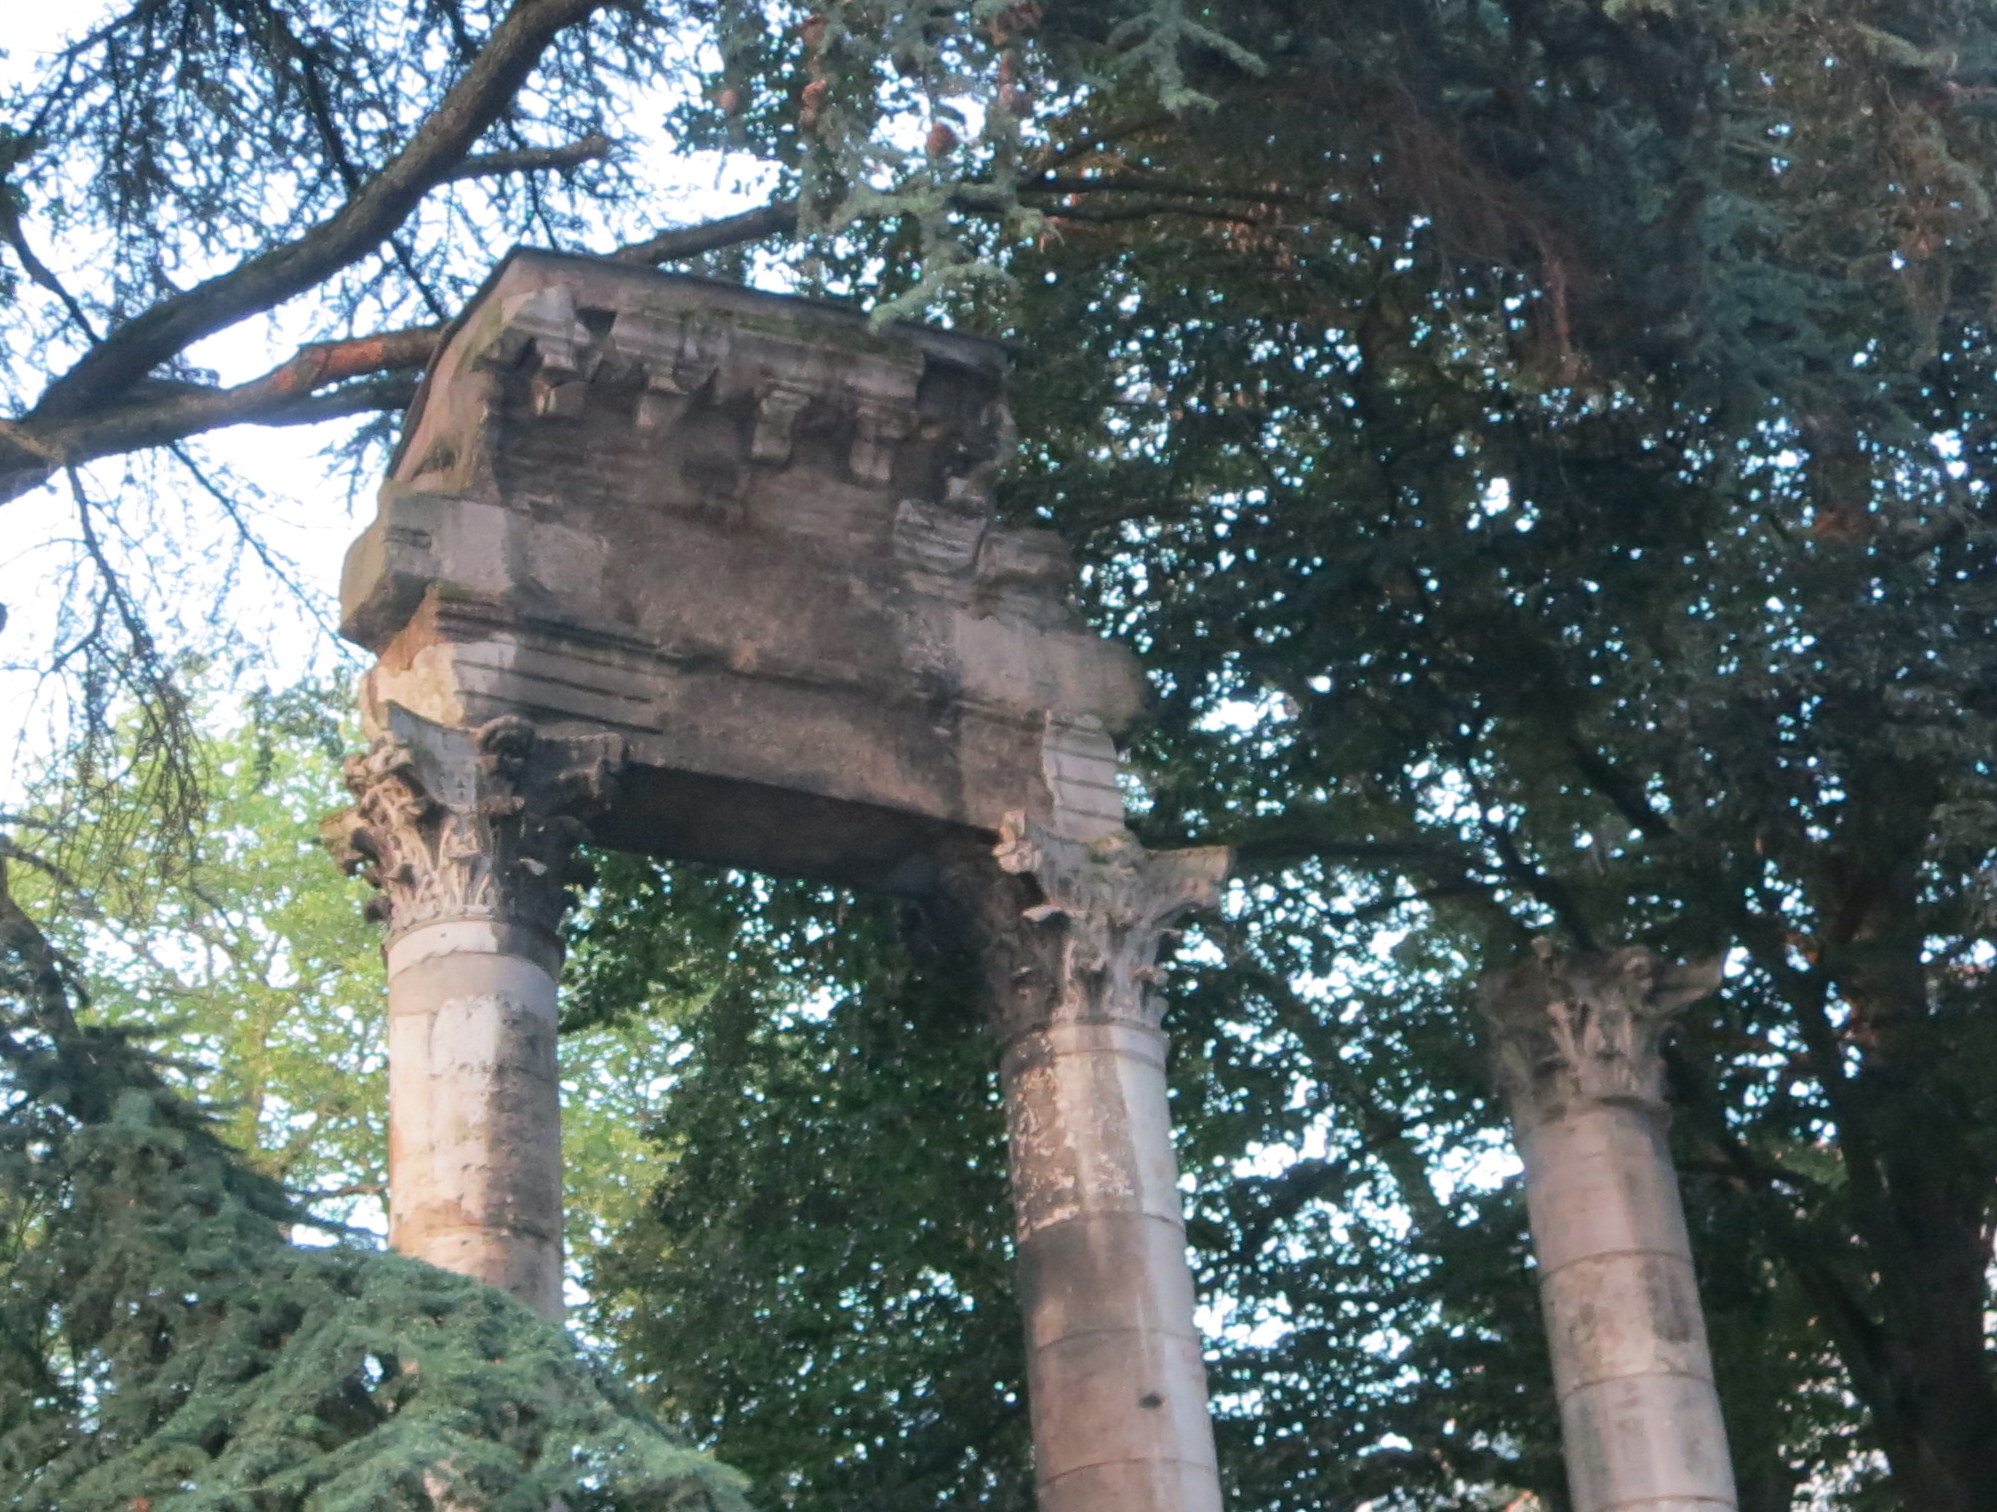 a stone archway between two columns surrounded by trees